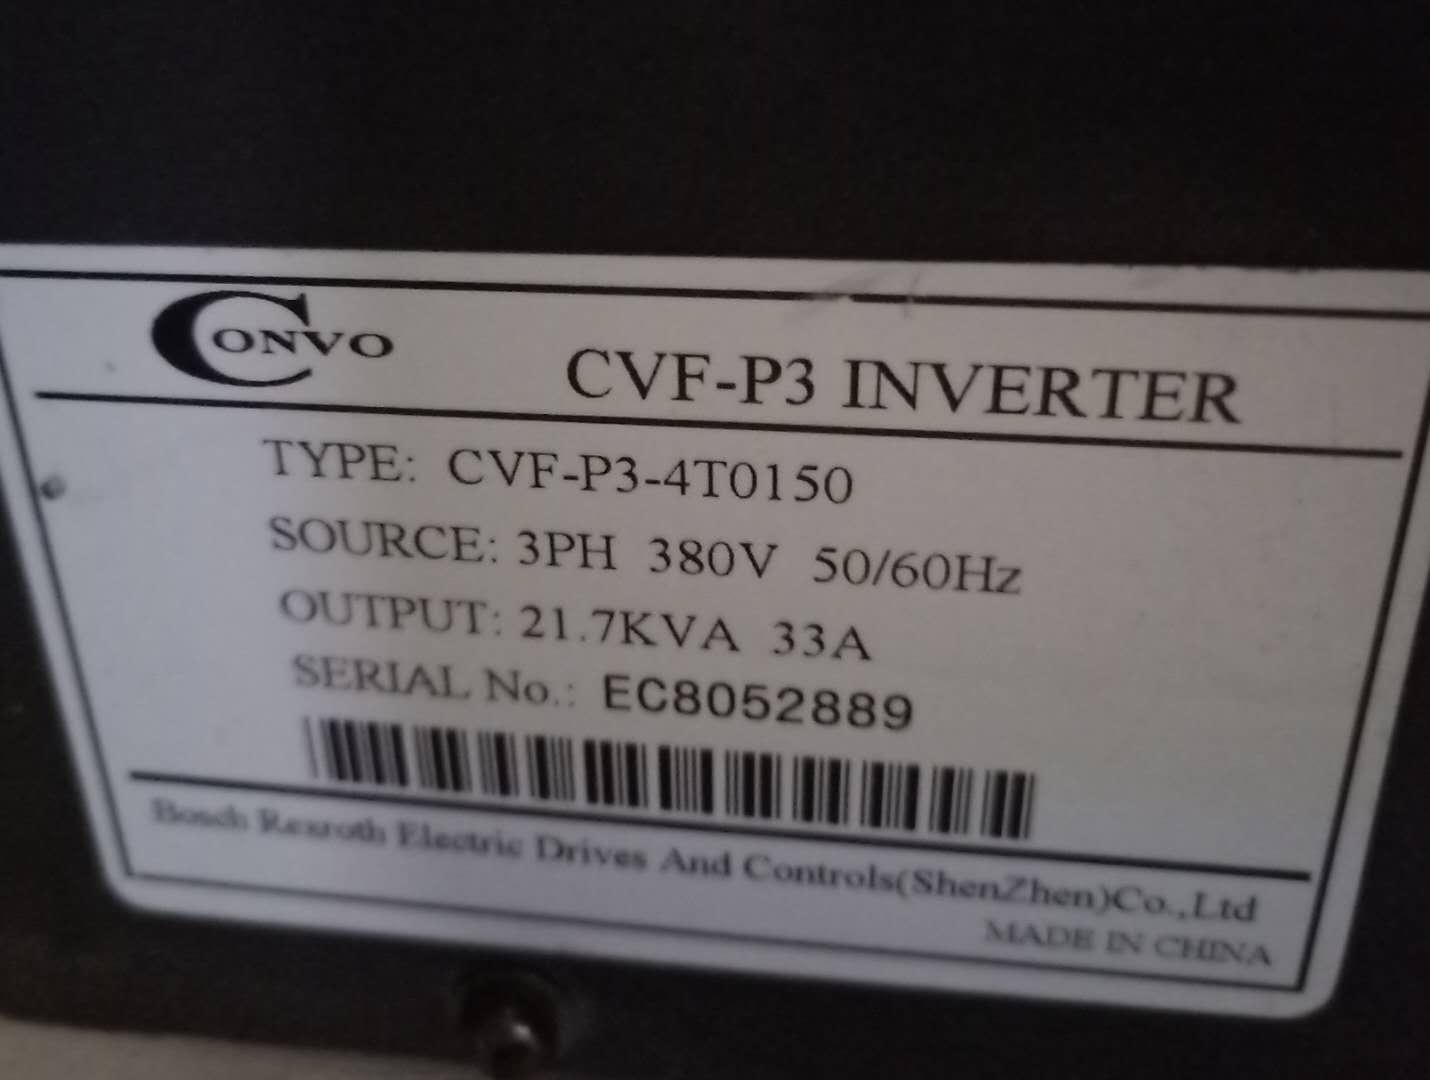 康沃ONVO变频器CVF-P3-4TO150 15KW 380V 康沃,变频器,CVF-P3-4TO150,380V,15KW